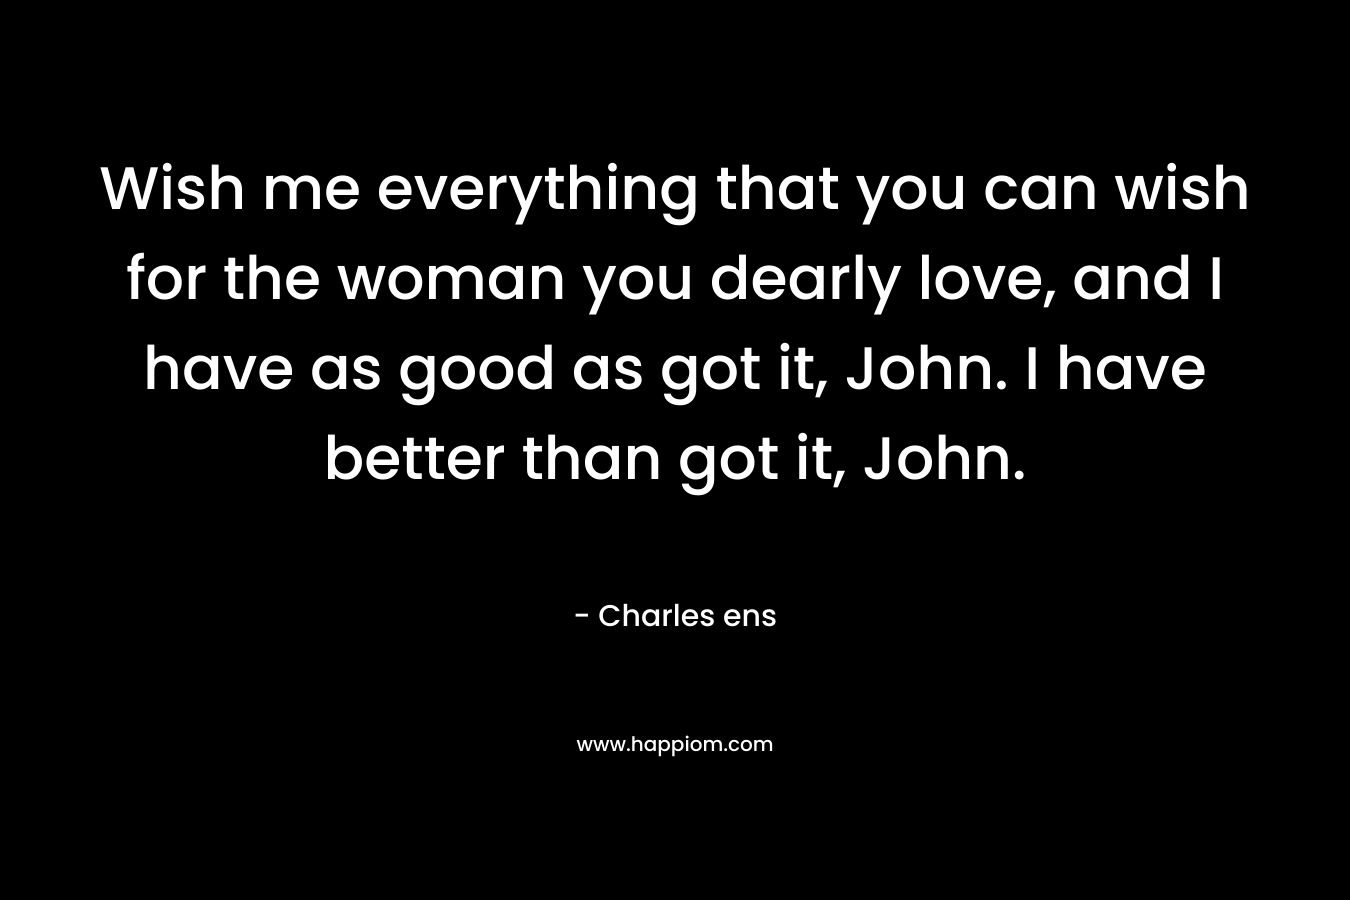 Wish me everything that you can wish for the woman you dearly love, and I have as good as got it, John. I have better than got it, John.